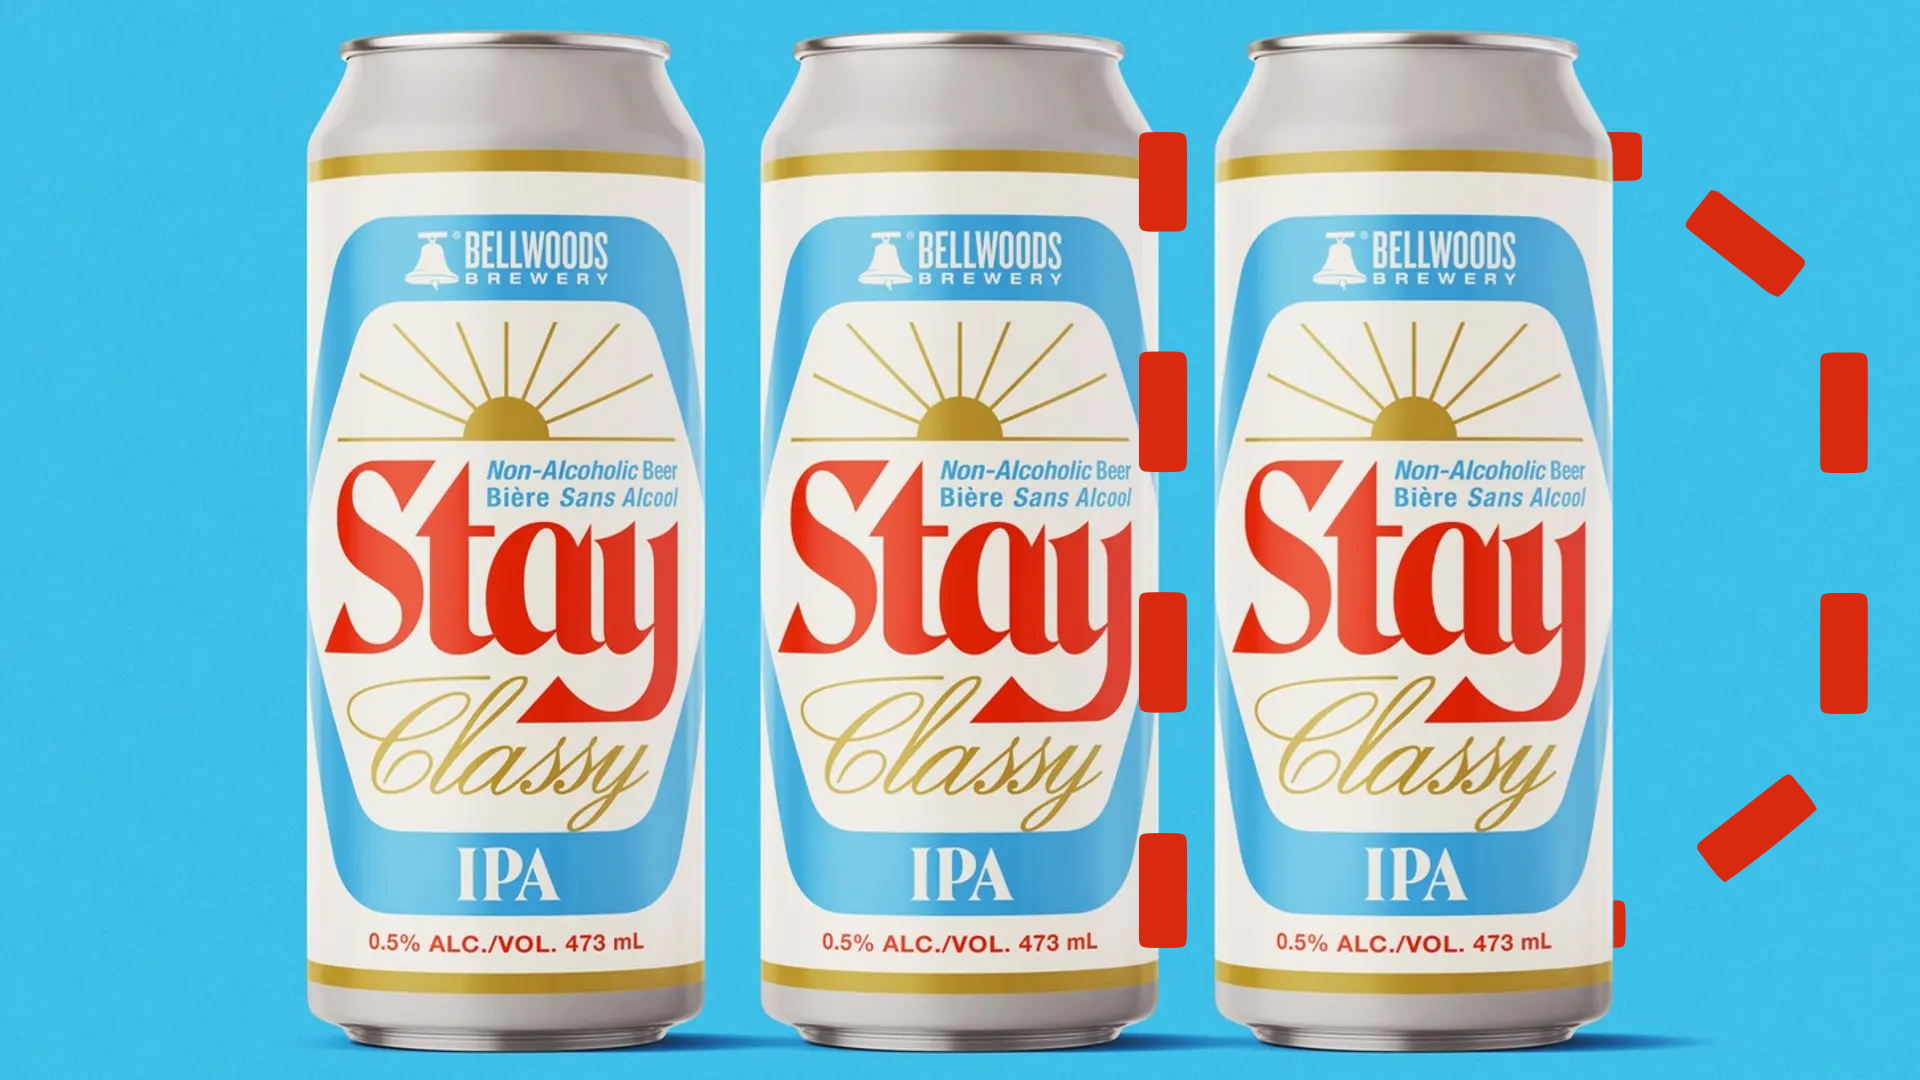 Pack of the Month: When It Comes To Designing a Non-Alcoholic Beer, Doublenaut Says ‘Stay Classy’